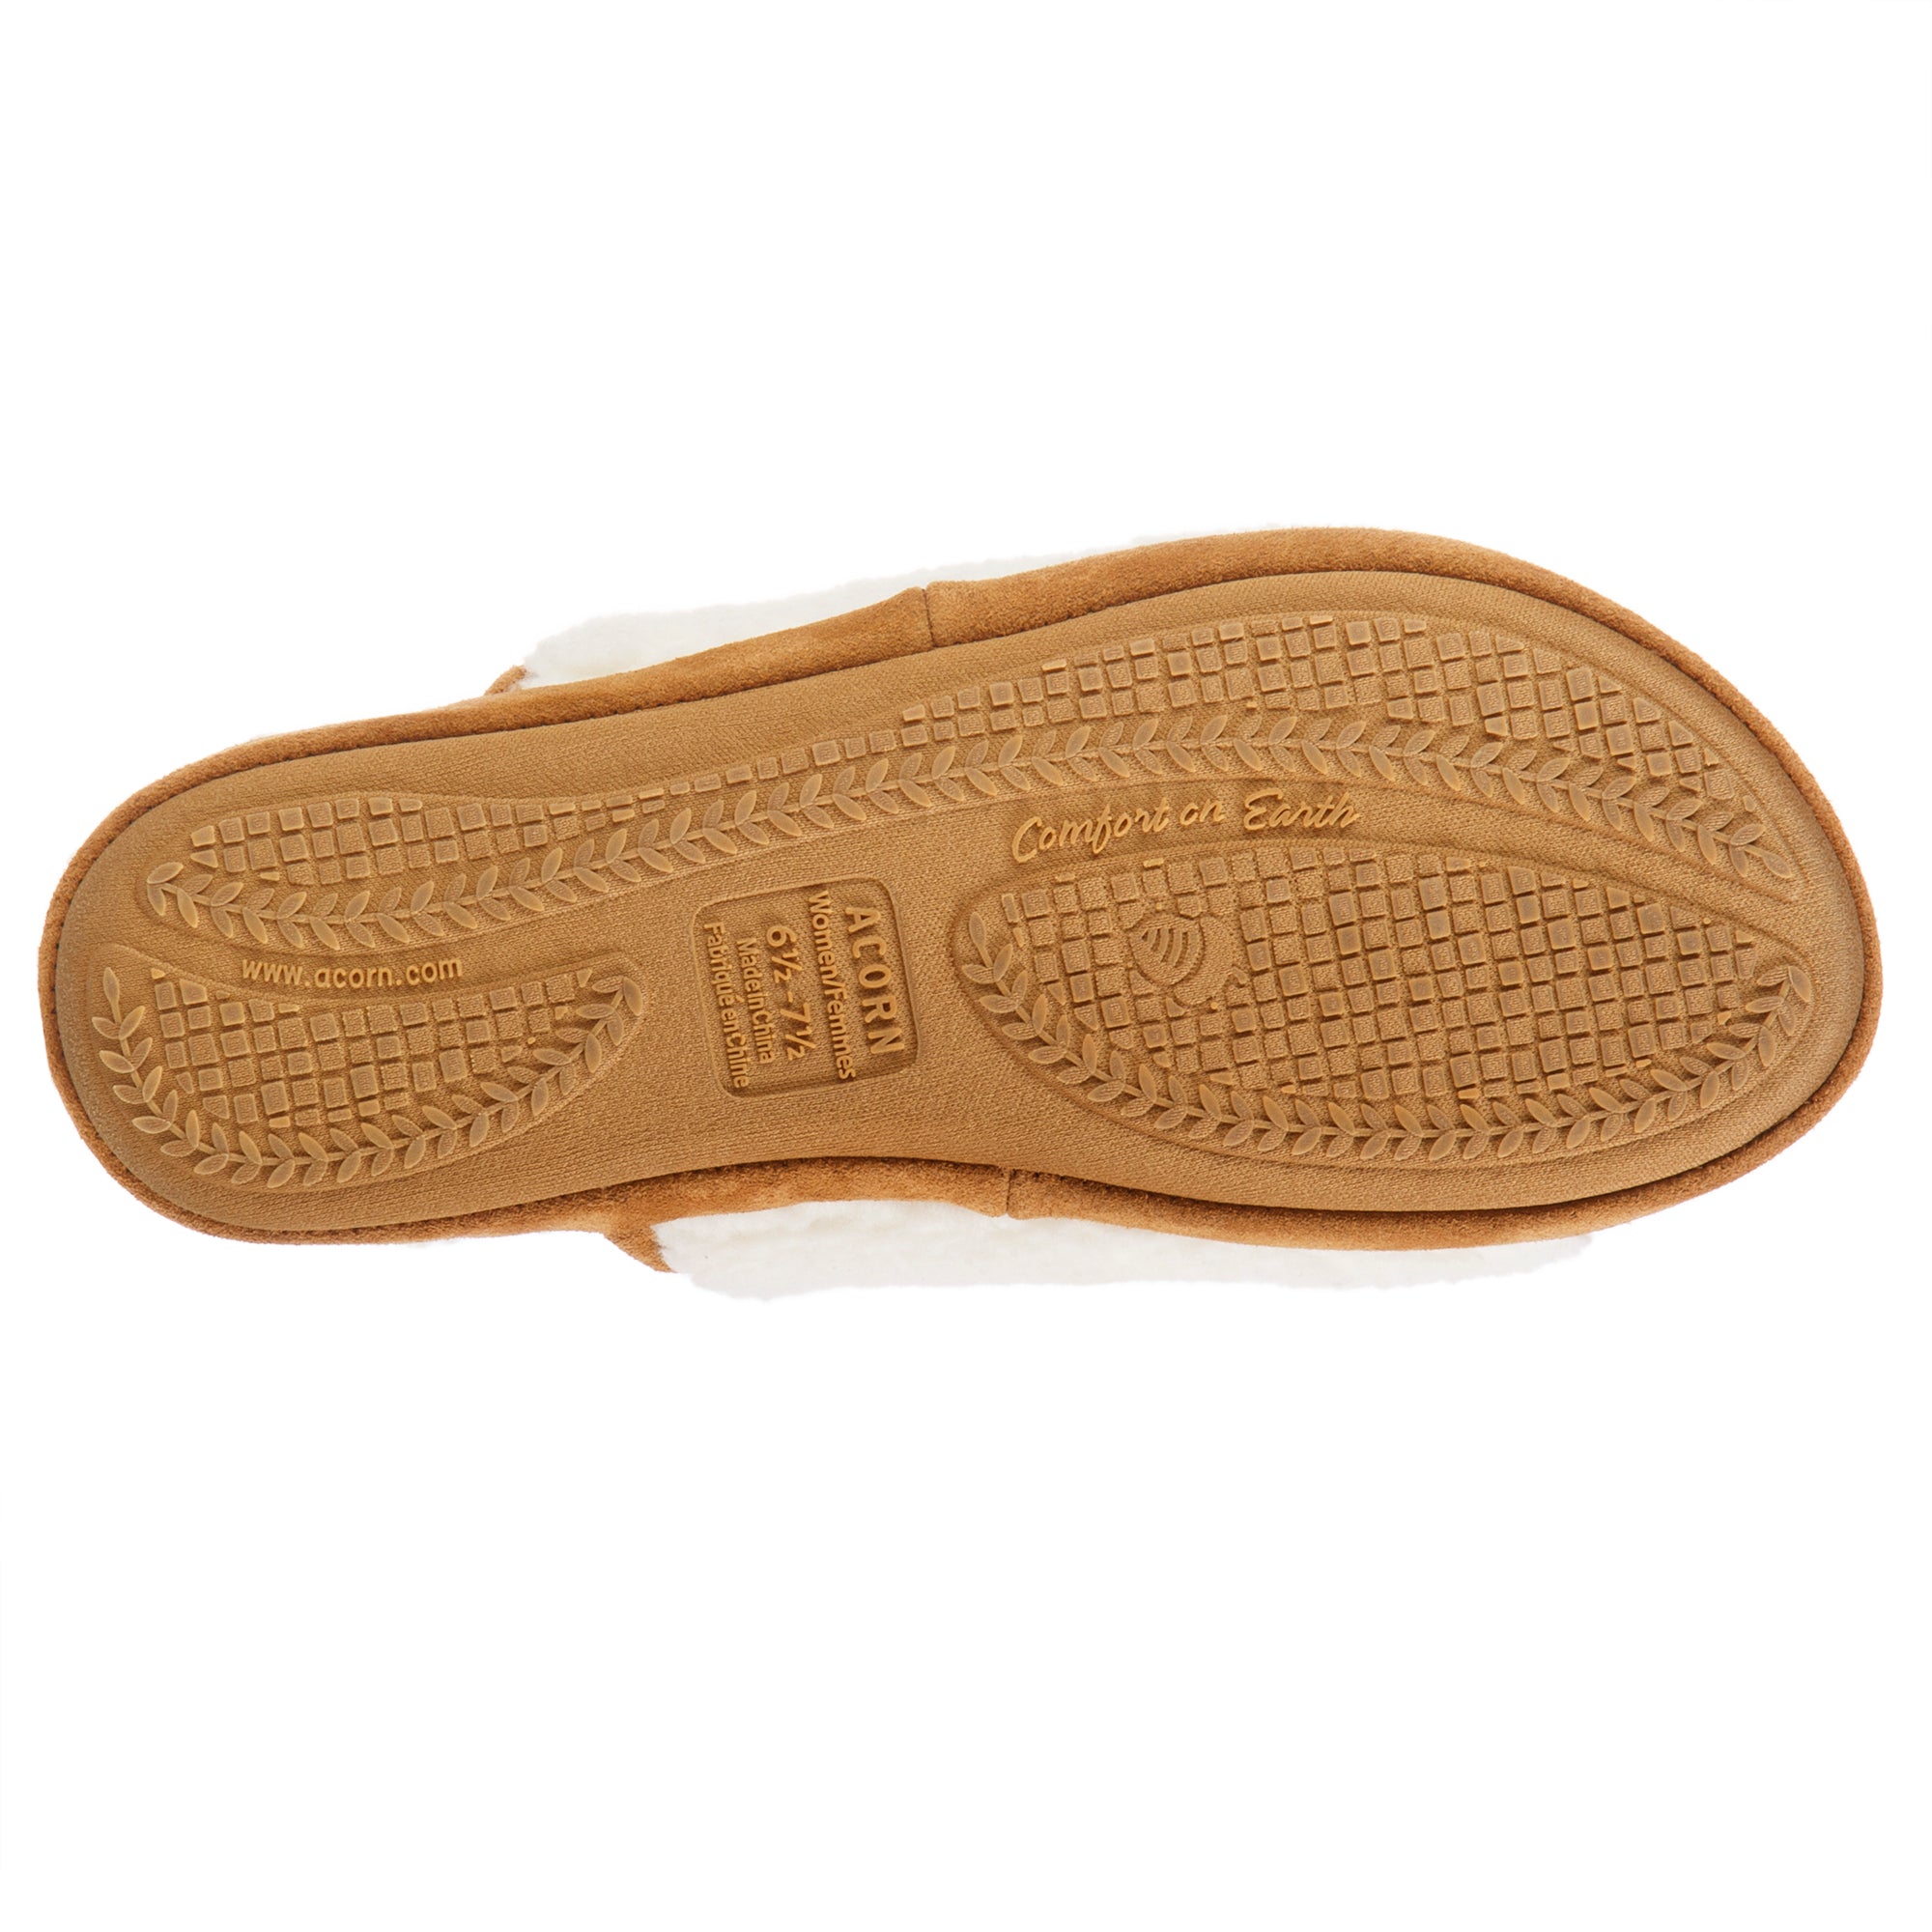 Women's Recycled Harbor Slide with Cloud Cushion® Comfort.